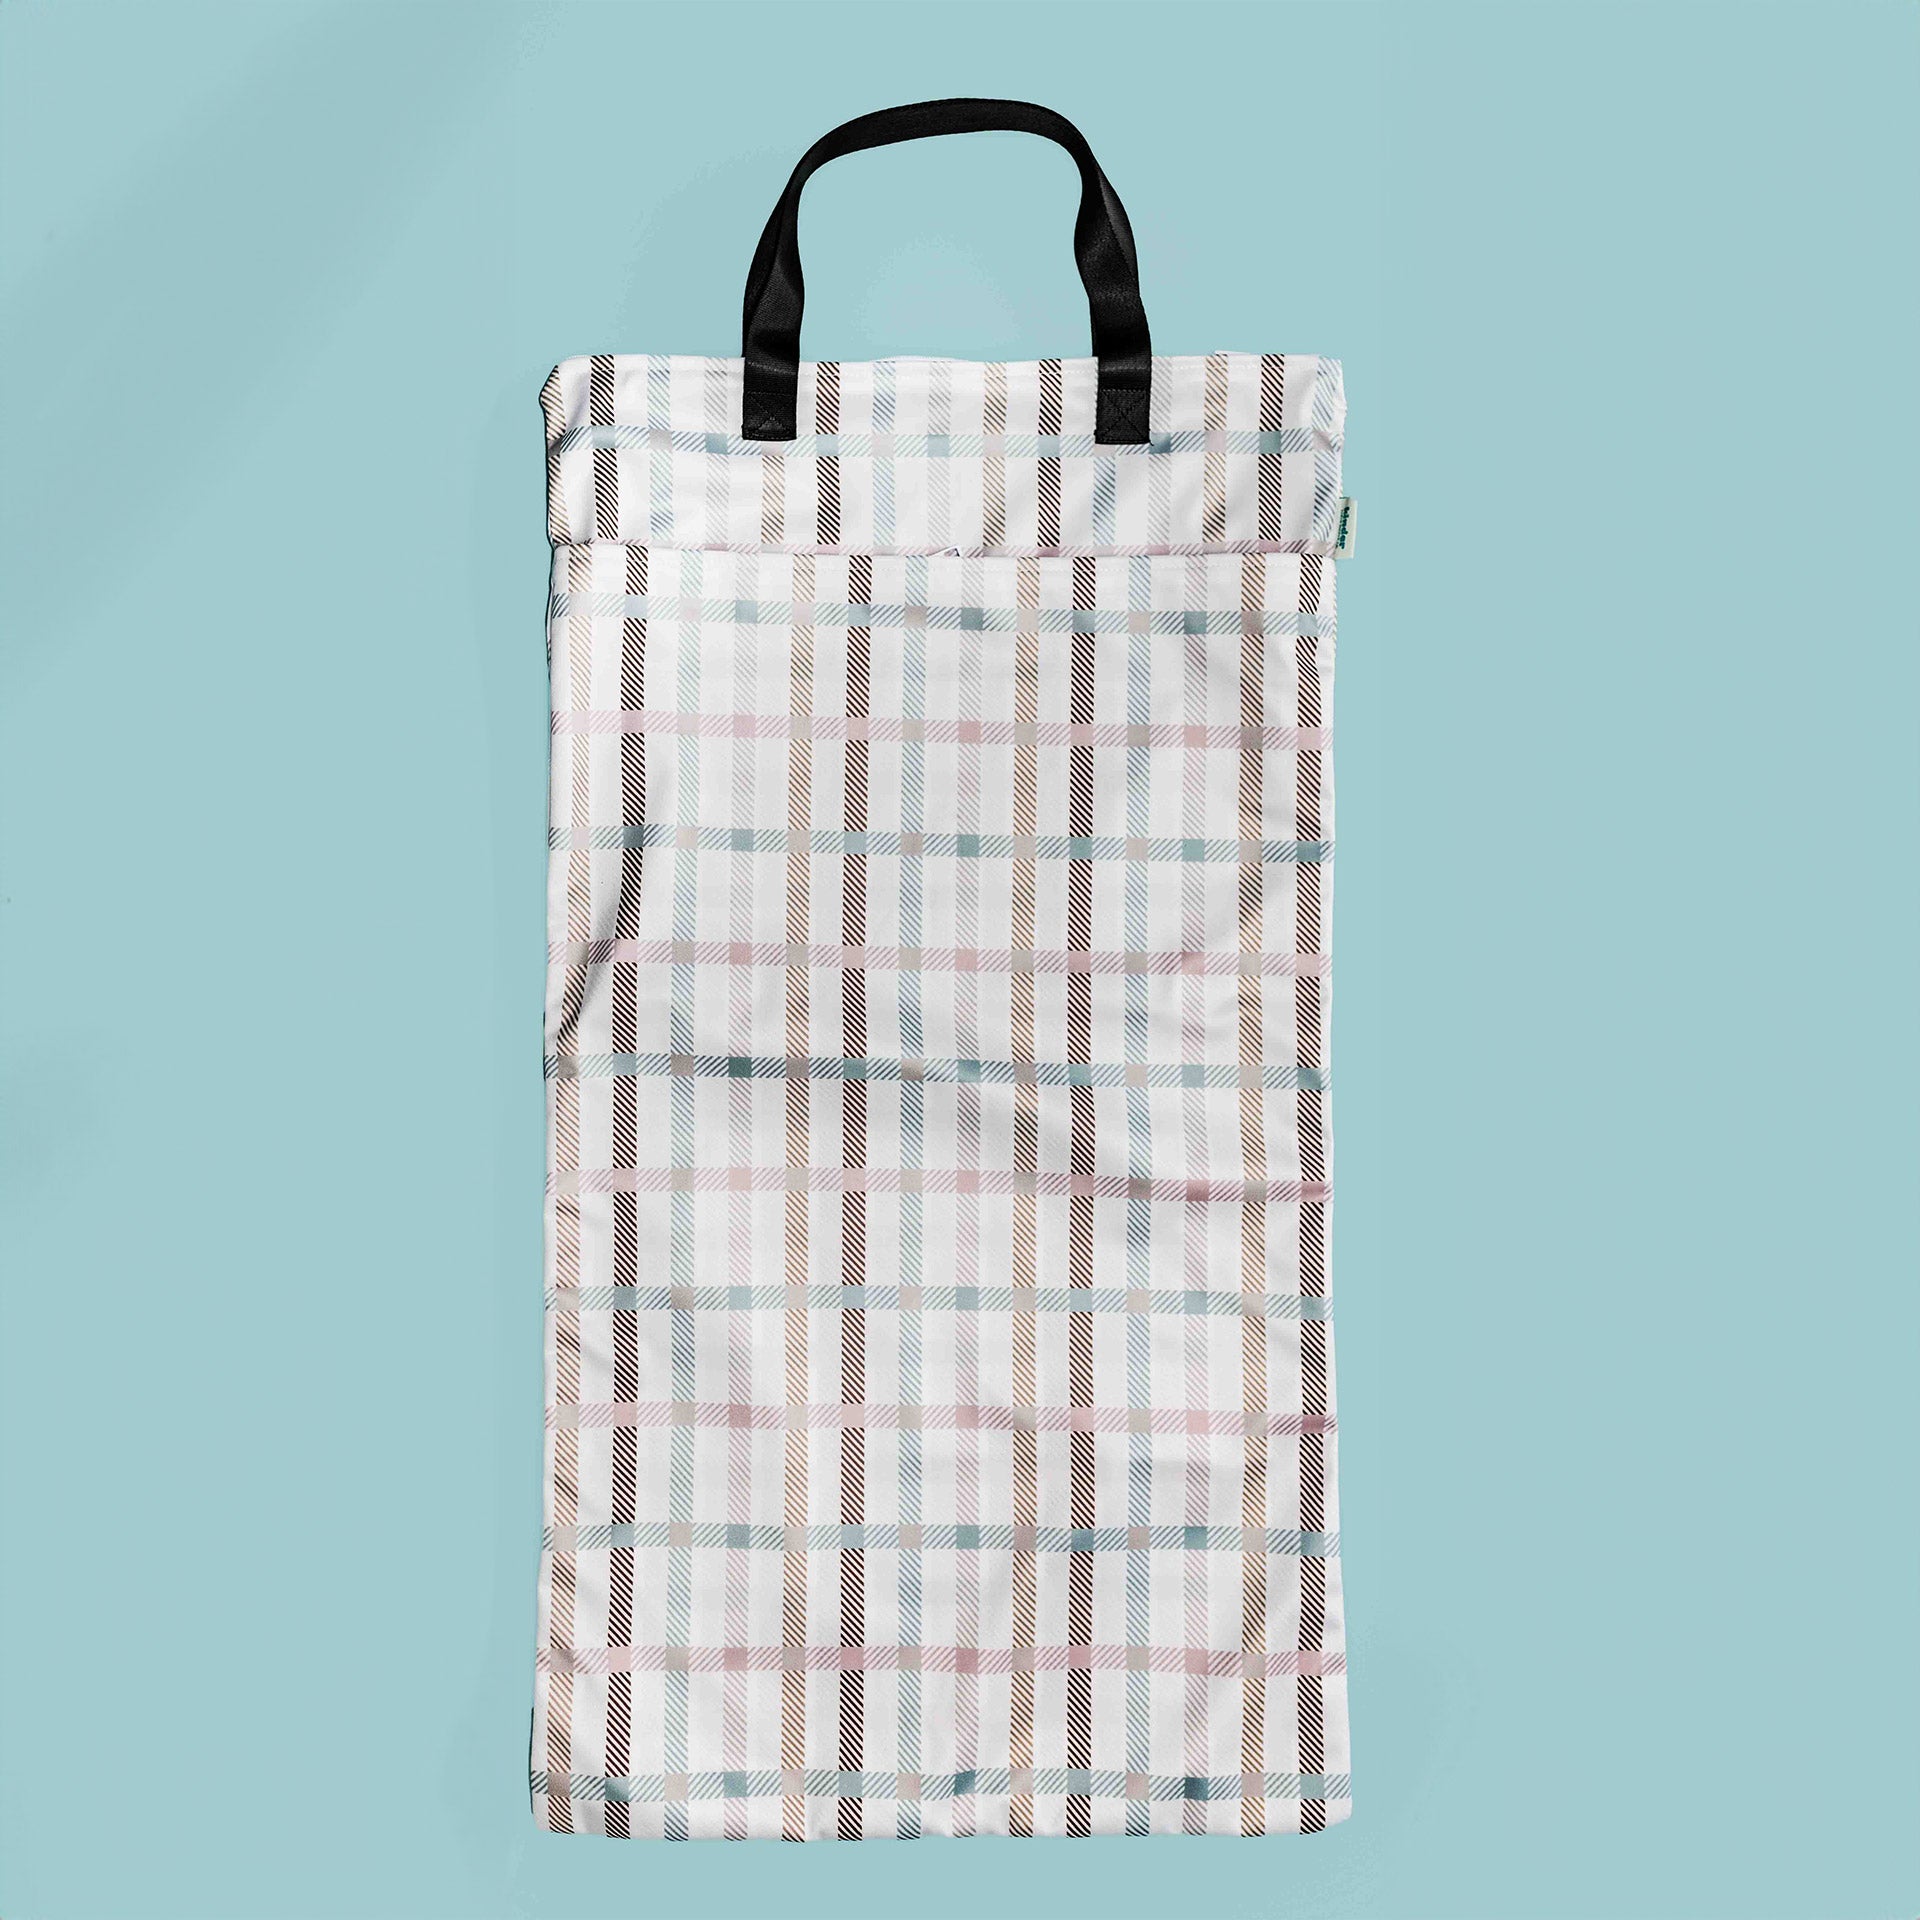 Patterned Large Zipper Hanging Wet Bag, Laundry Bag with Handles